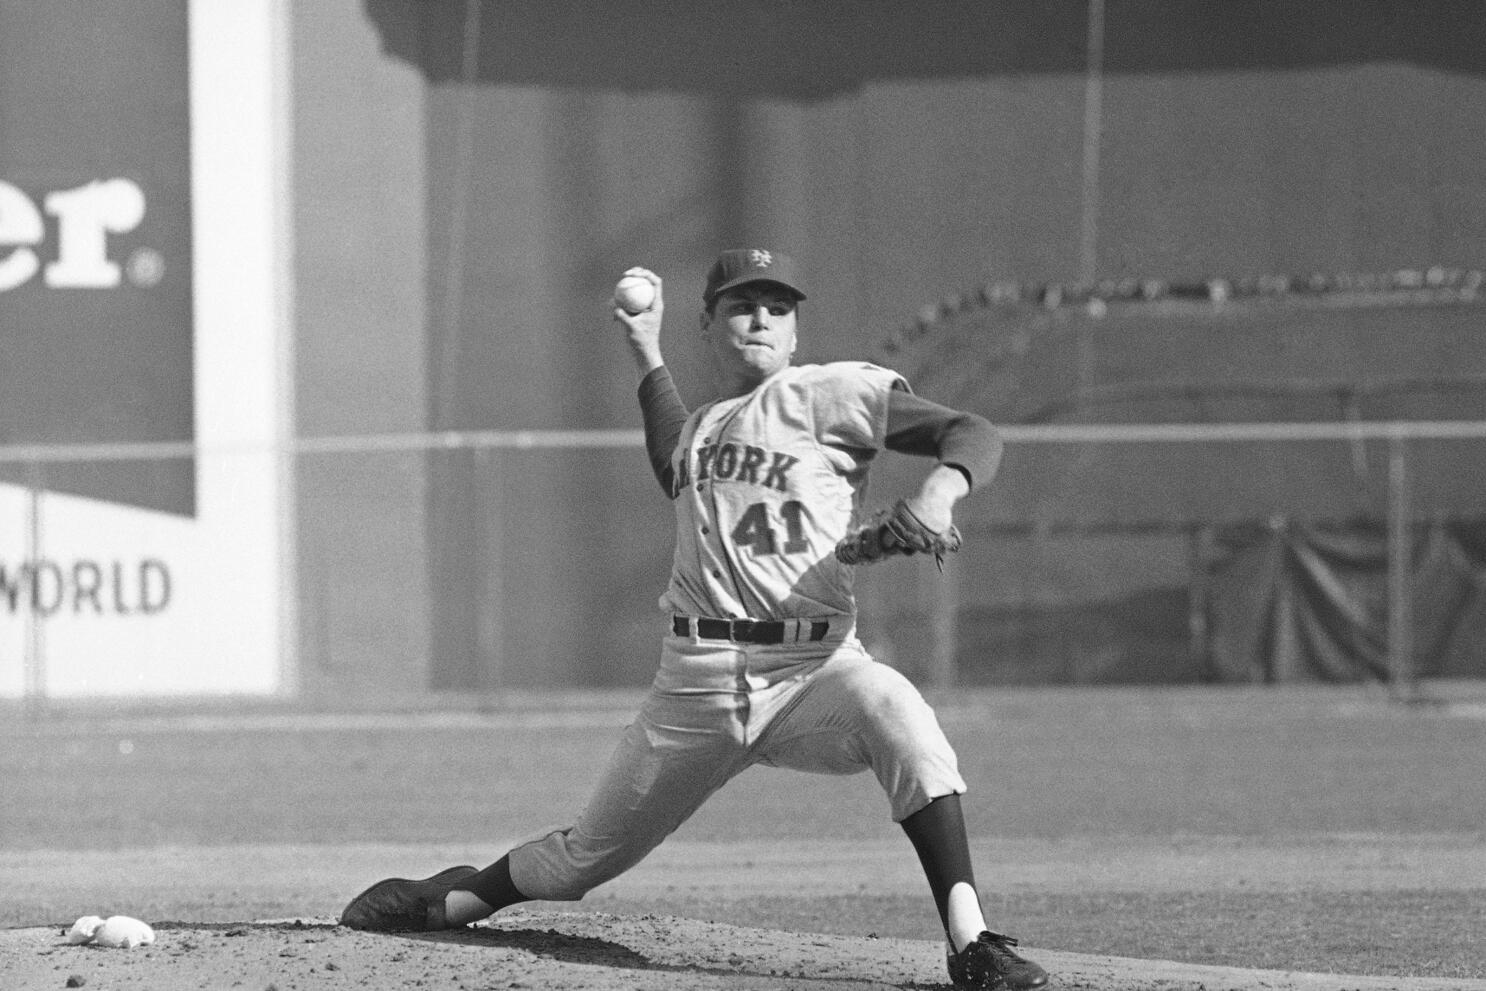 Hall of Fame Mets pitcher Tom Seaver through the years